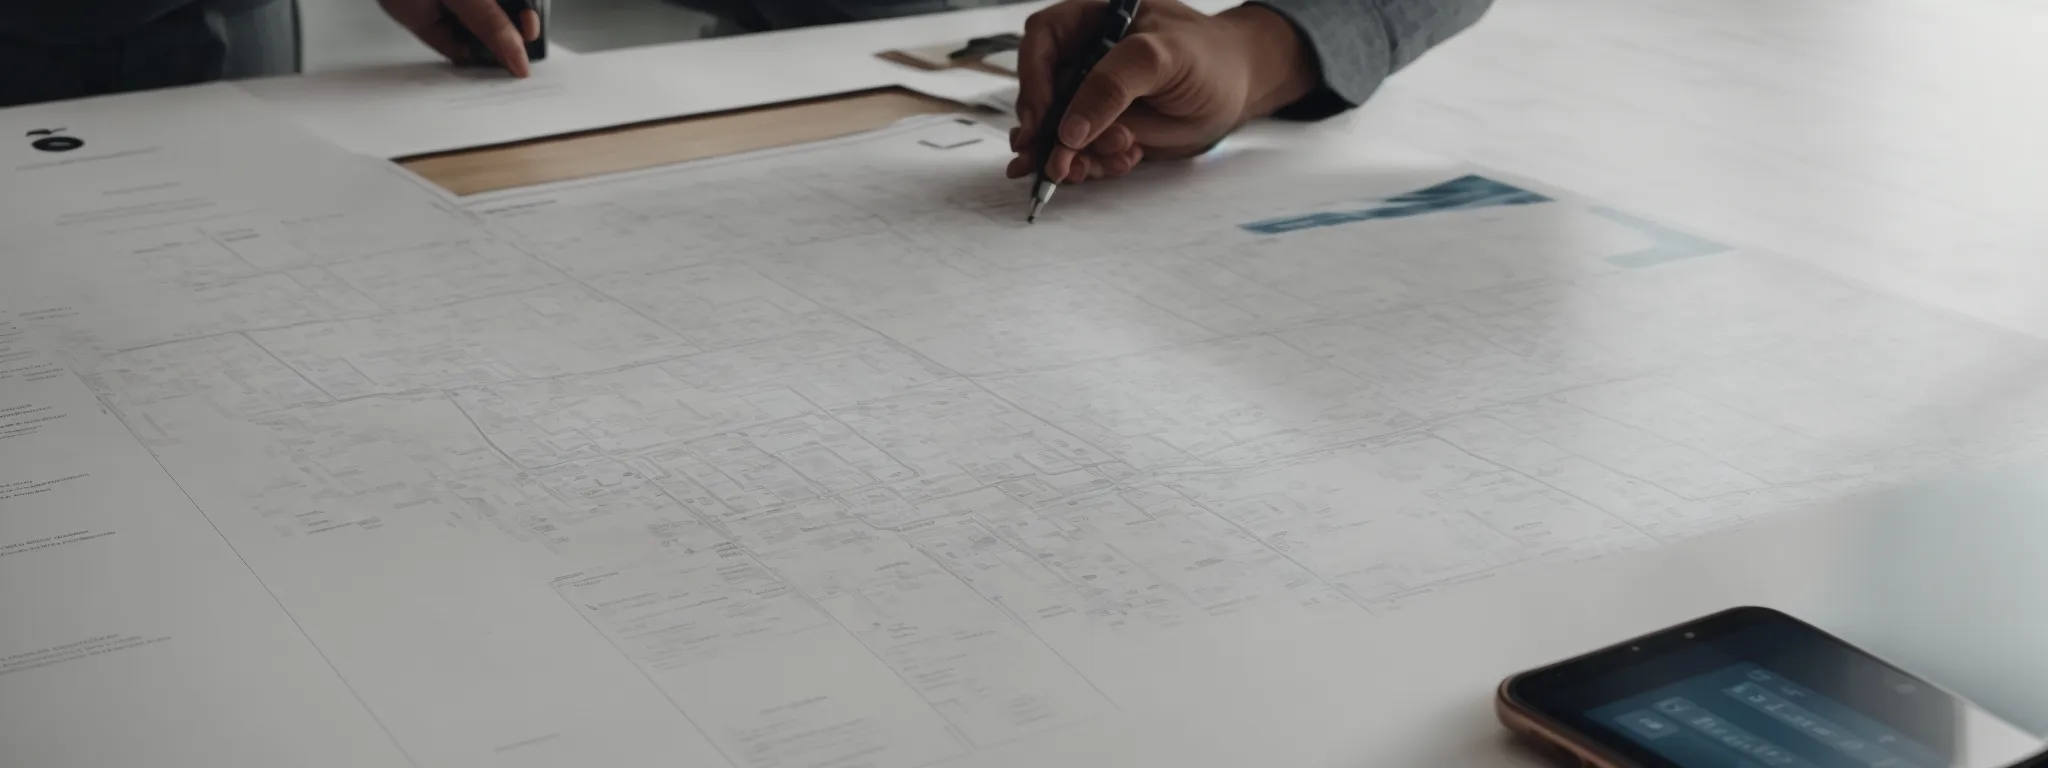 a person pouring over a comprehensive digital marketing blueprint spread out on a large table.